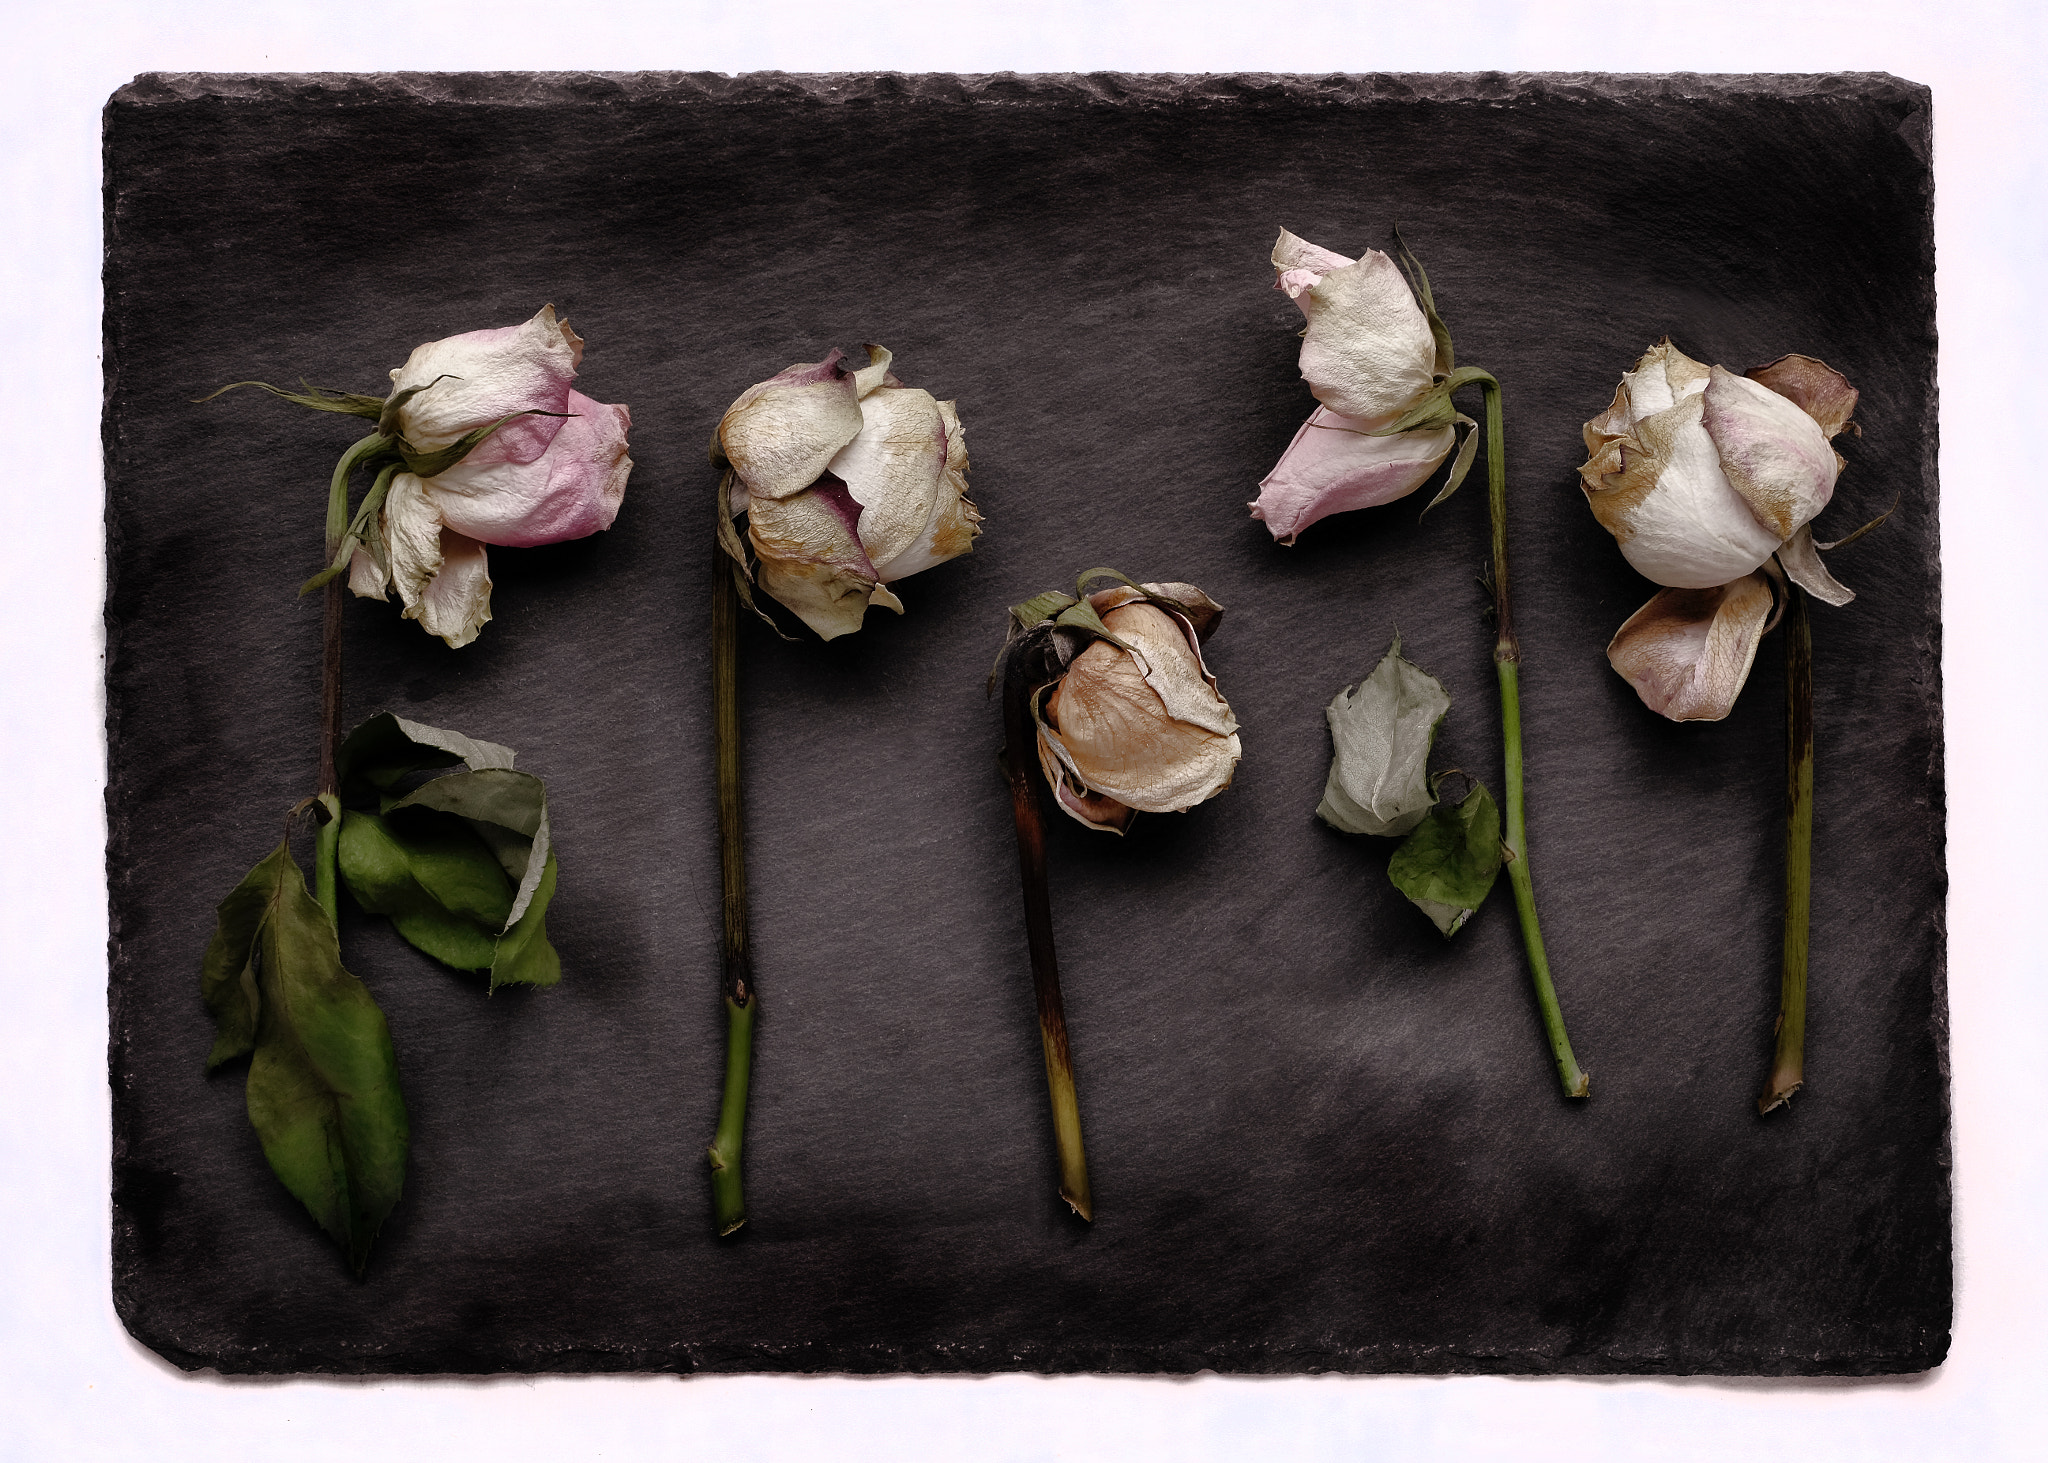 ZEISS Touit 50mm F2.8 sample photo. Five decaying roses photography